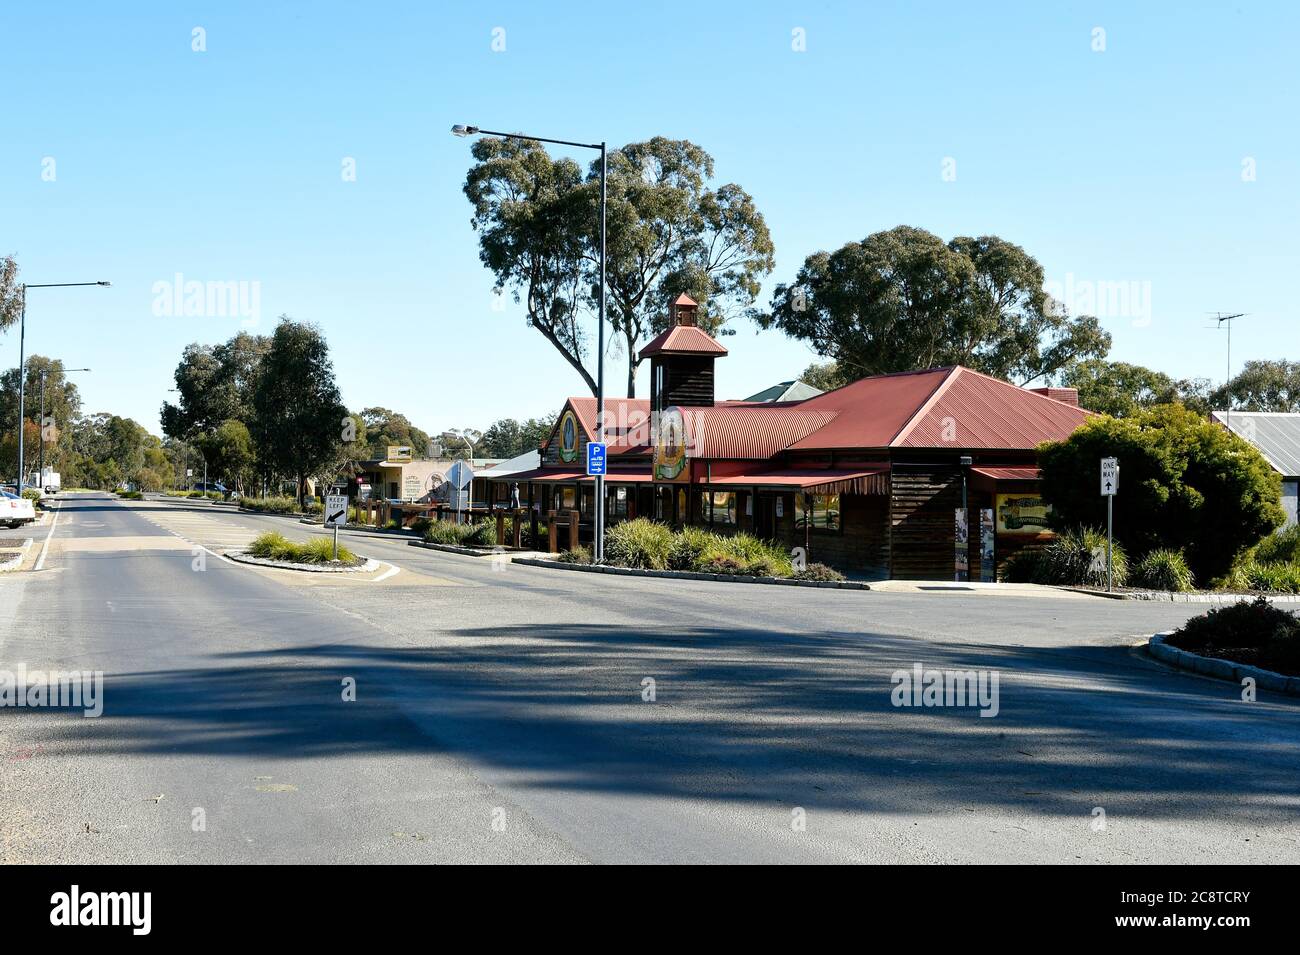 Glenrowan, Victoria. The view along Gladstone Street in Glenrowan with the tourist attraction 'Ned Kelly's Last Stand' in the foreground. Stock Photo